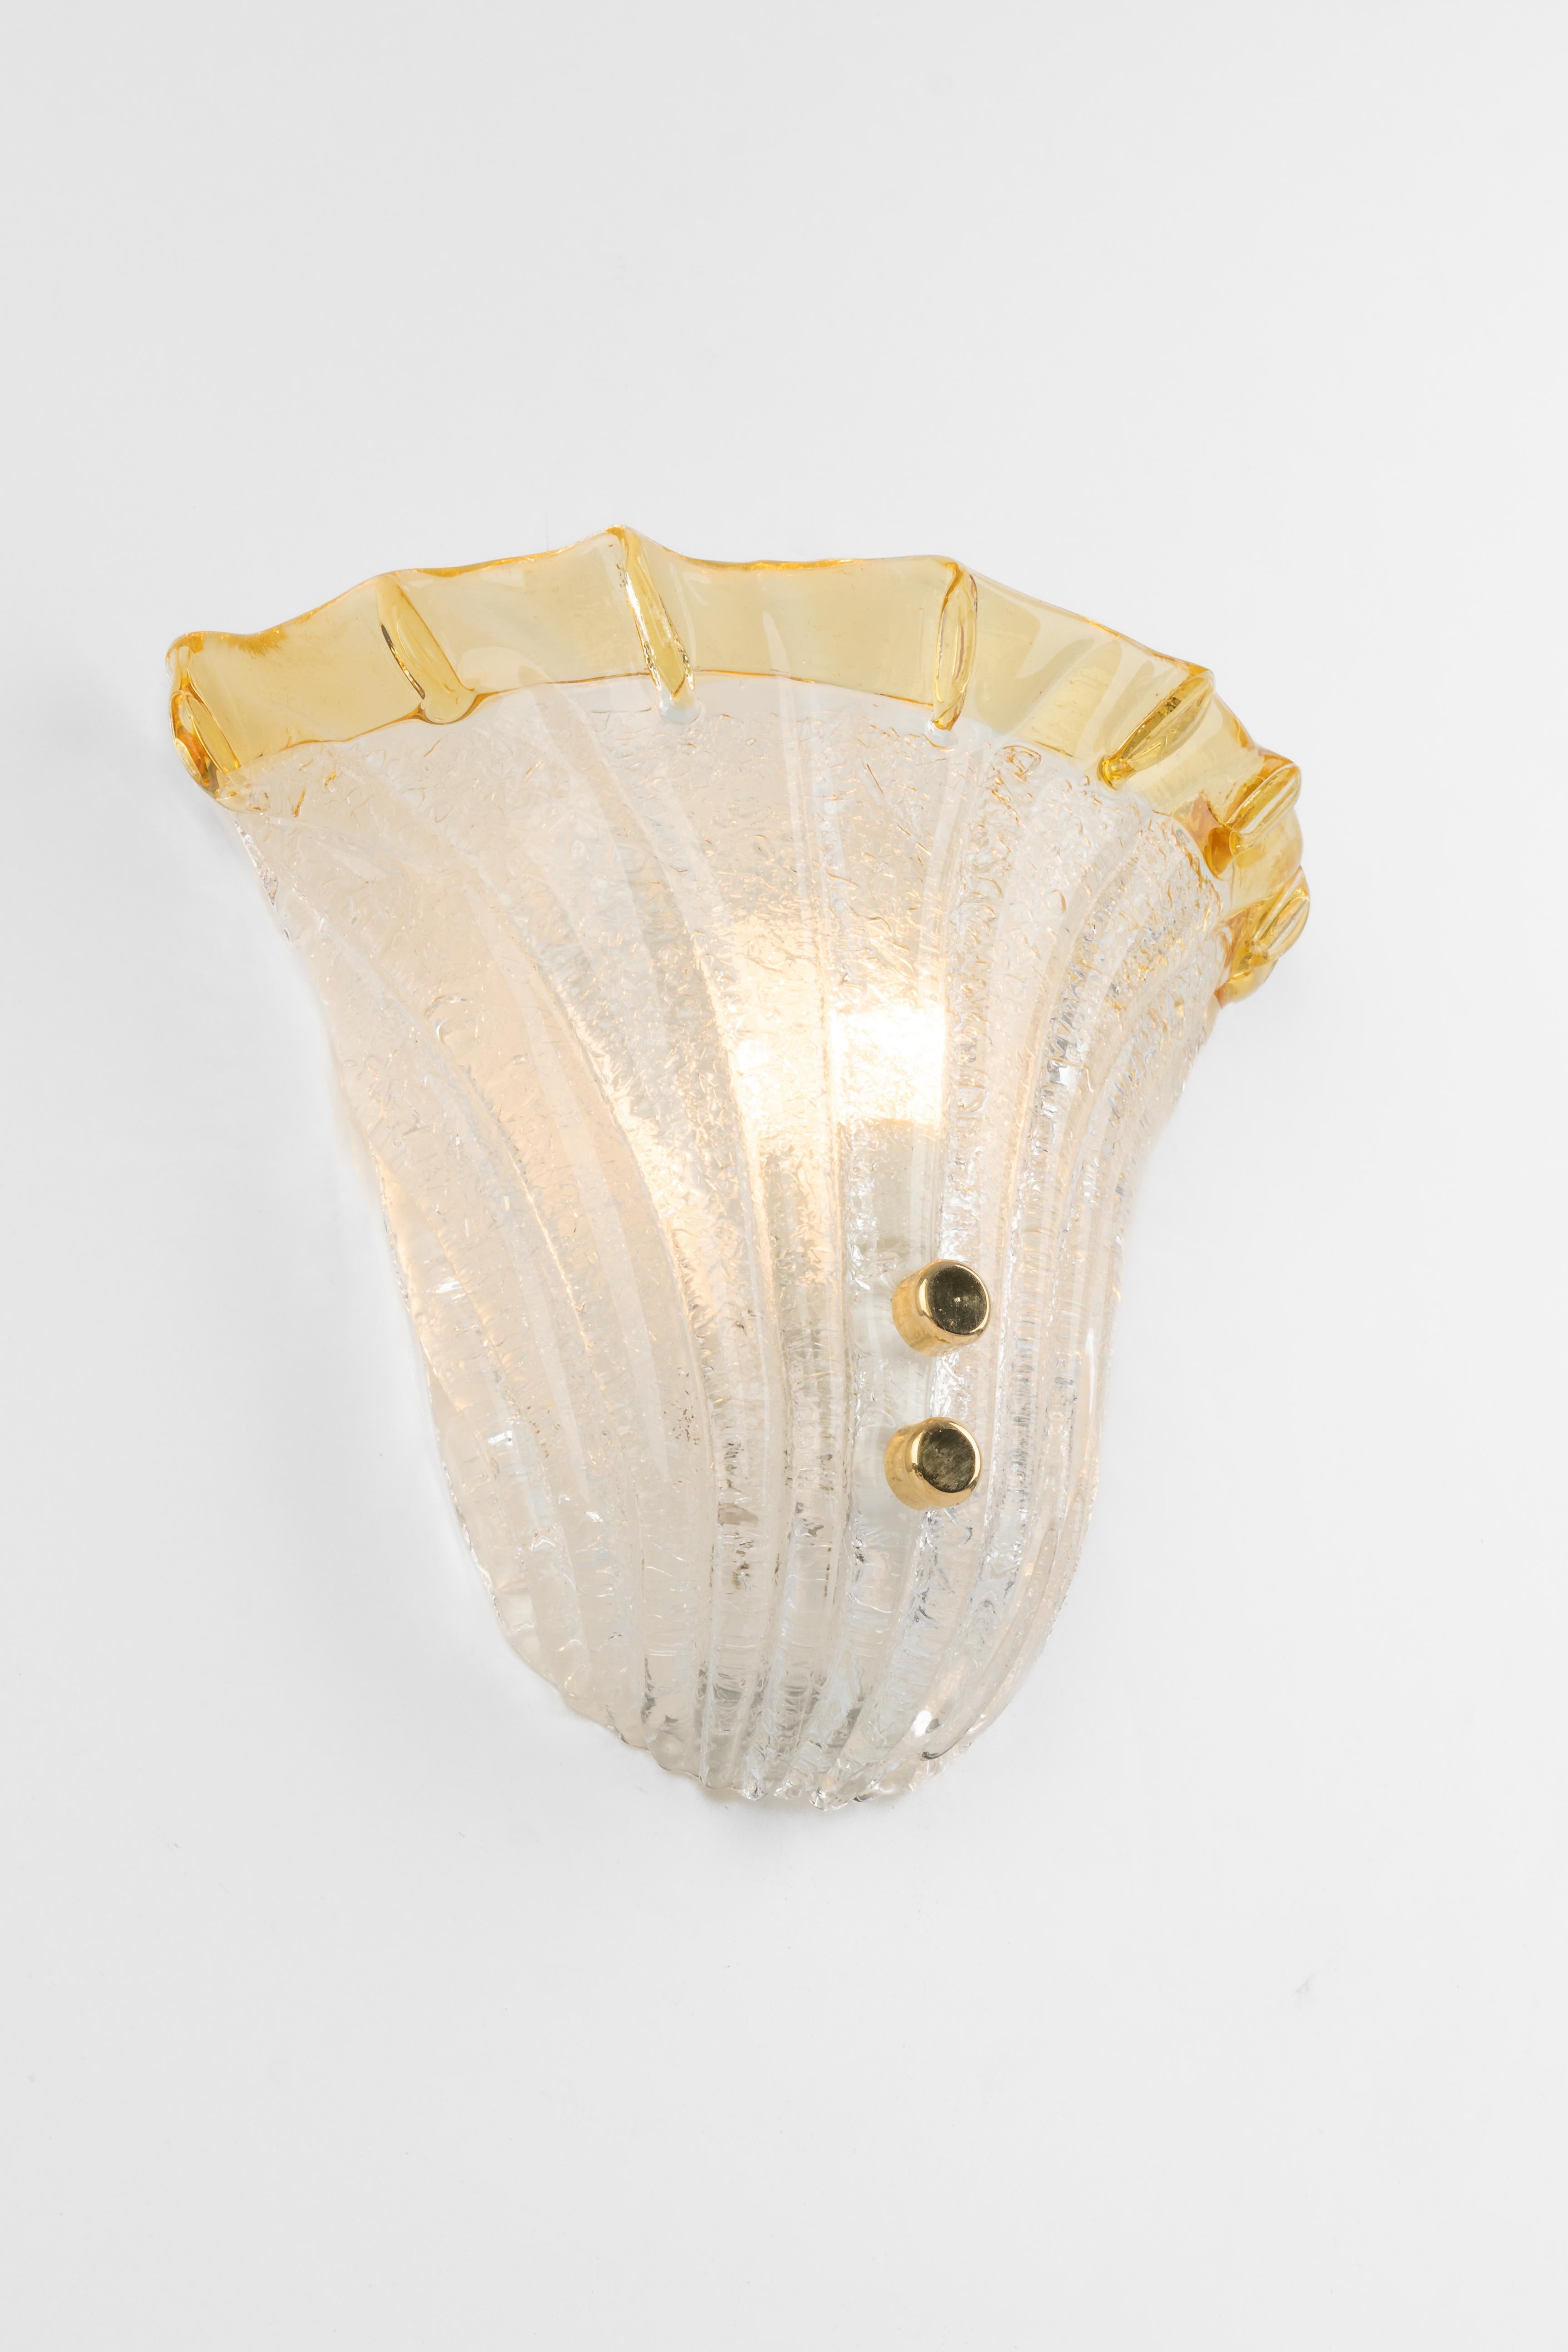 Italian Pair of Murano Glass Wall Light in Venini Style, Italy, 1970s For Sale